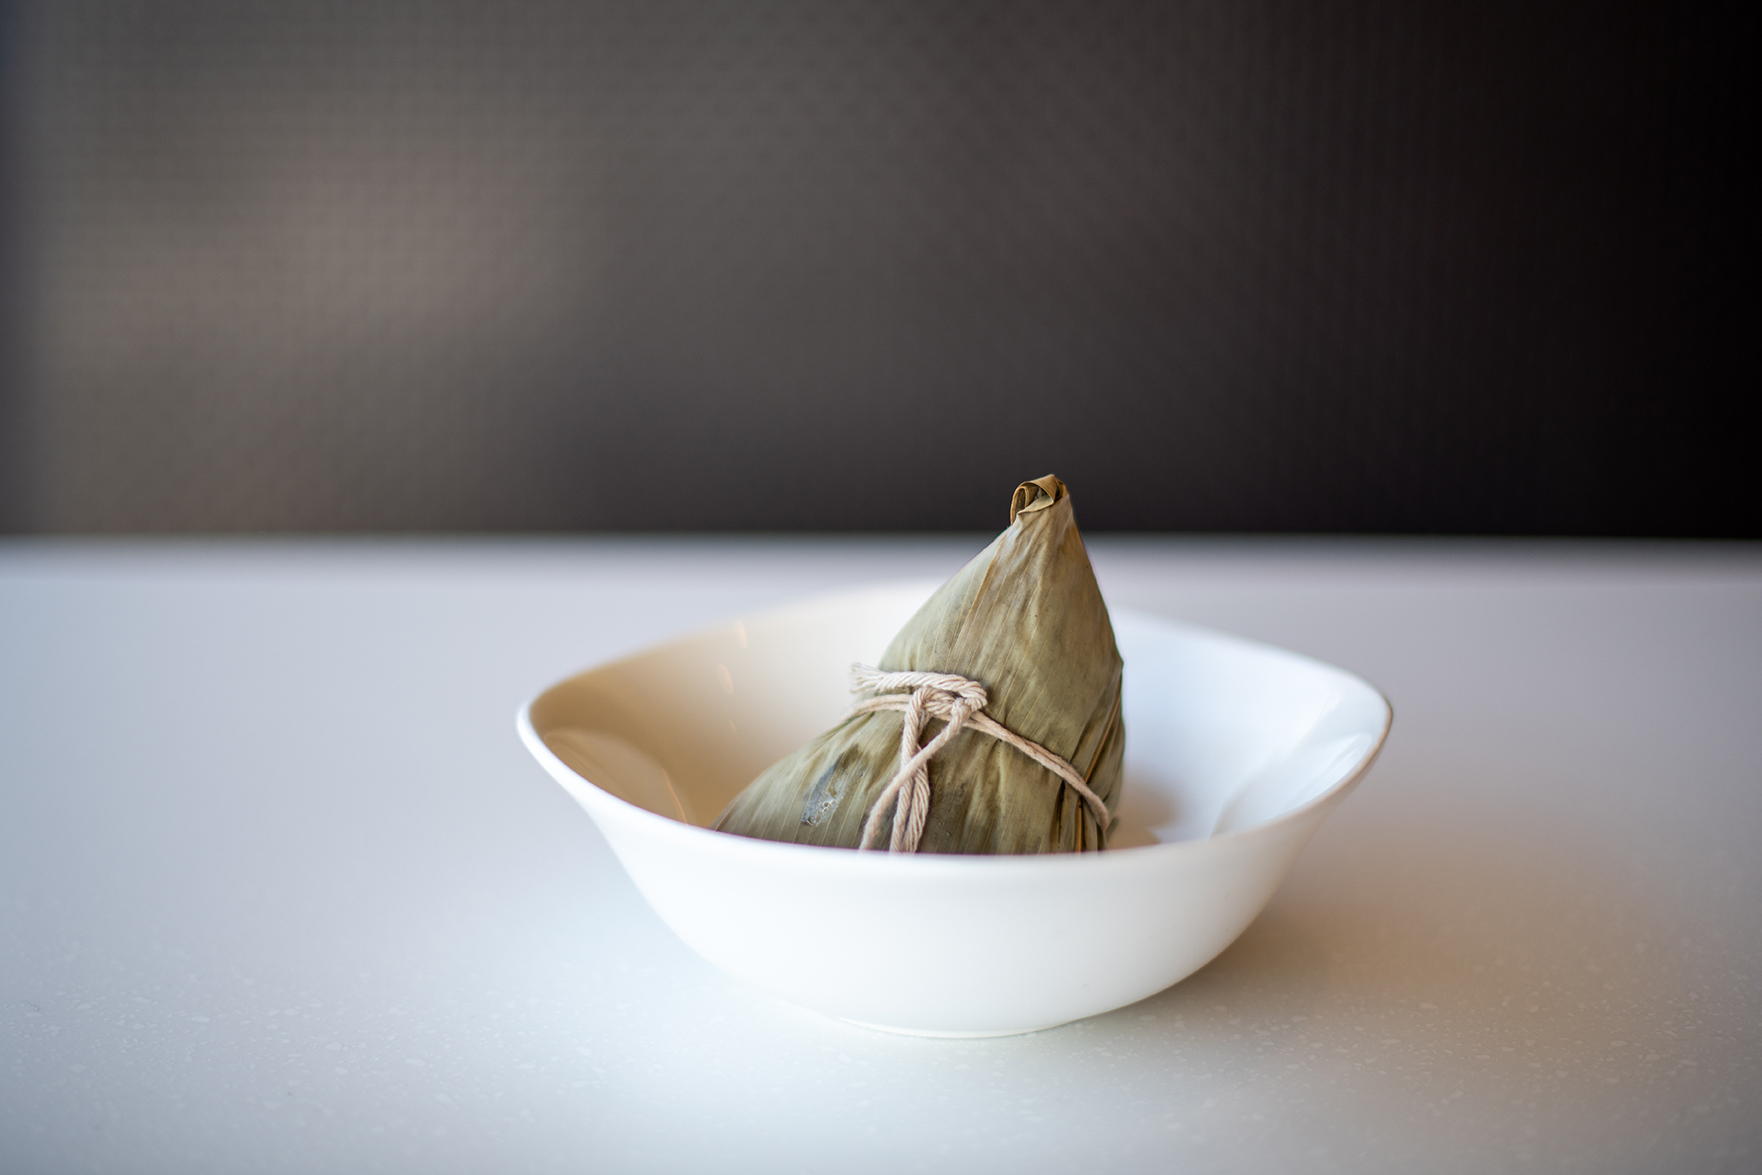 Taiwanese bah tsang (or leaf-wrapped rice dumpling) in a white bowl on a white countertop.